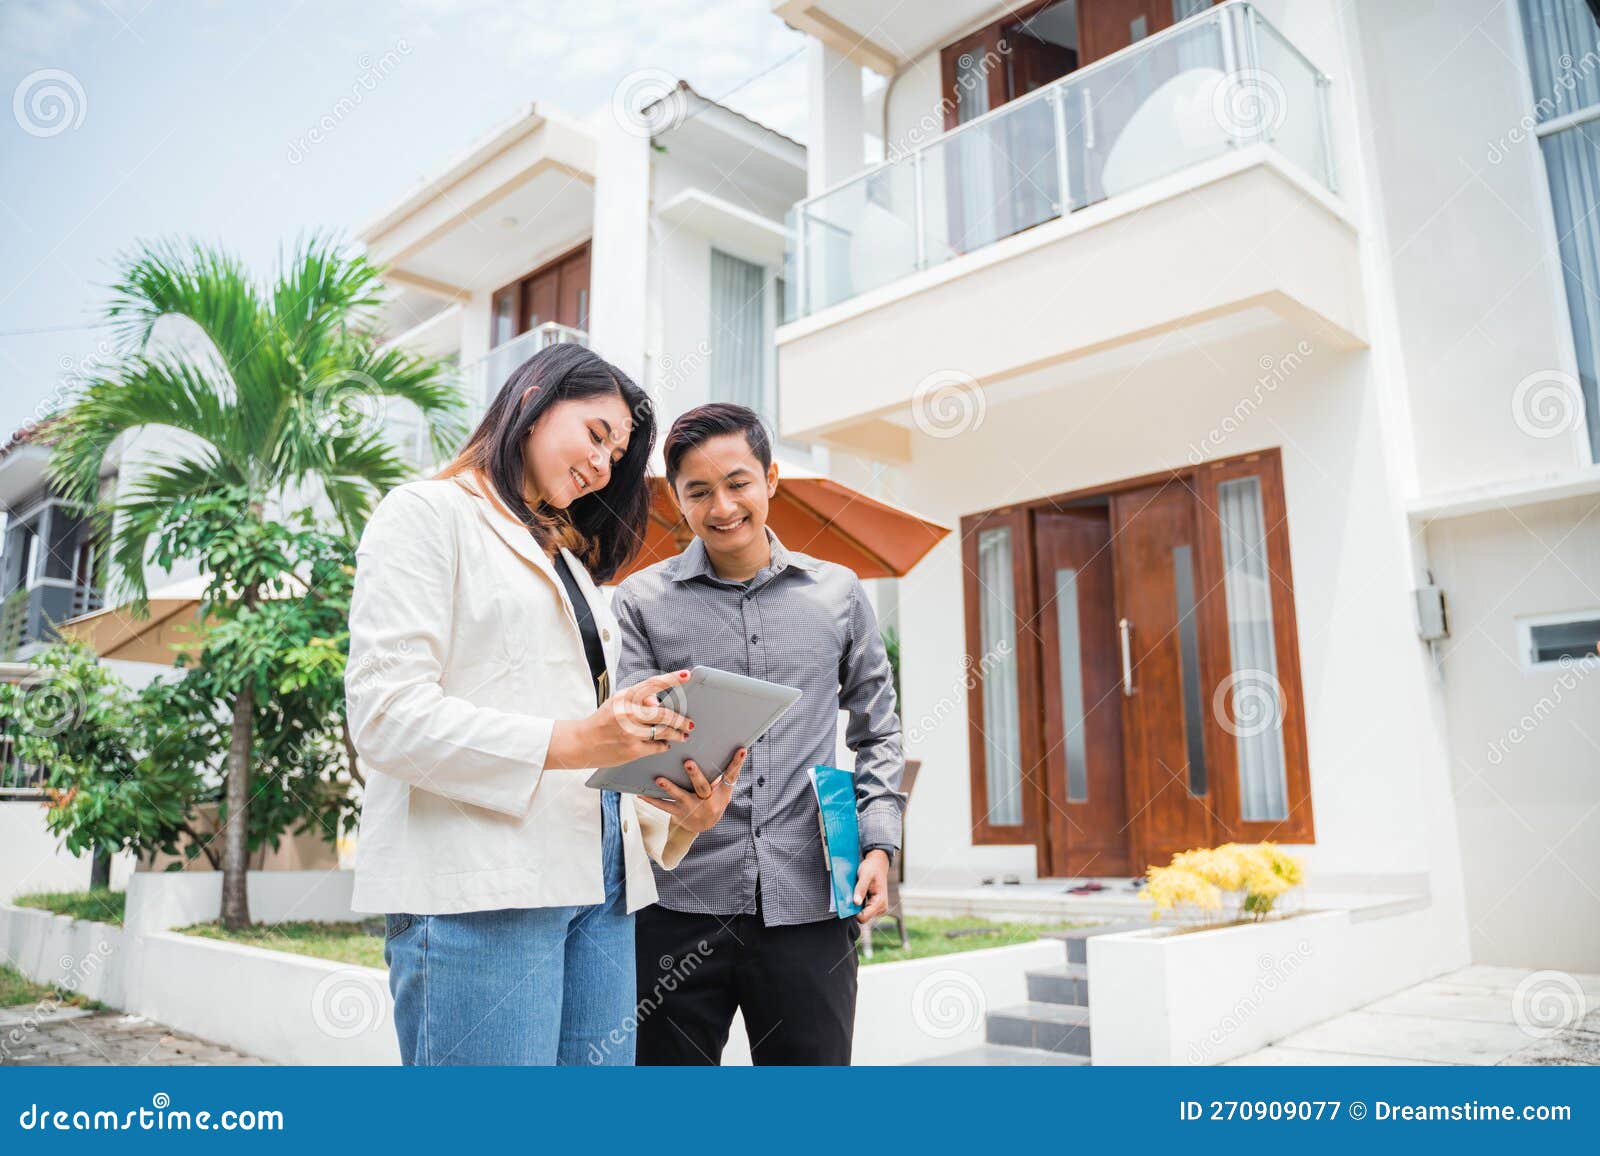 asian couple using pads and clipboards in a residential background